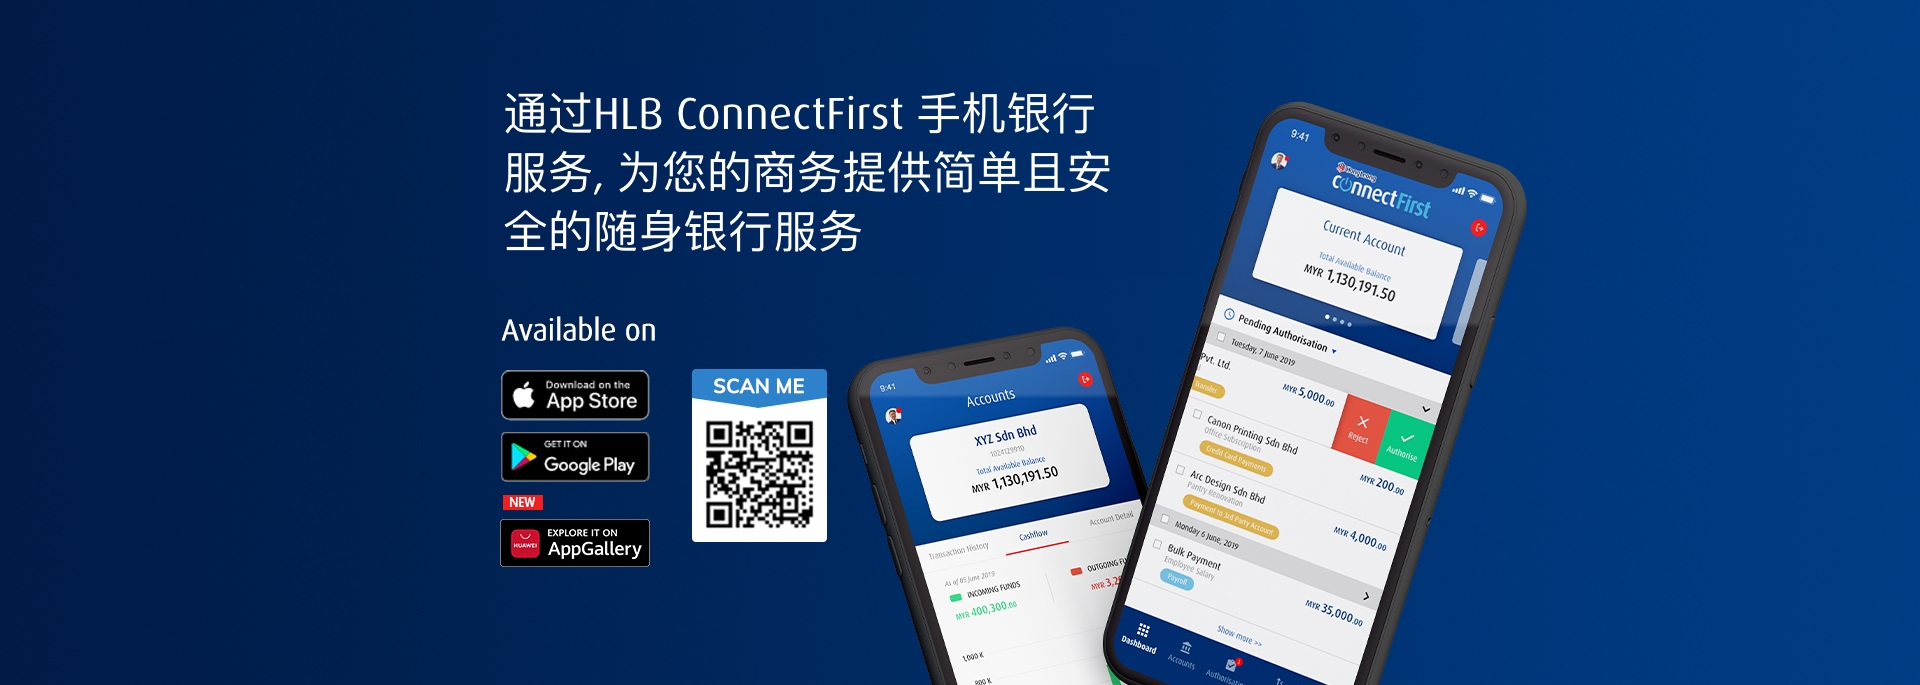 Hong Leong ConnectFirst Mobile